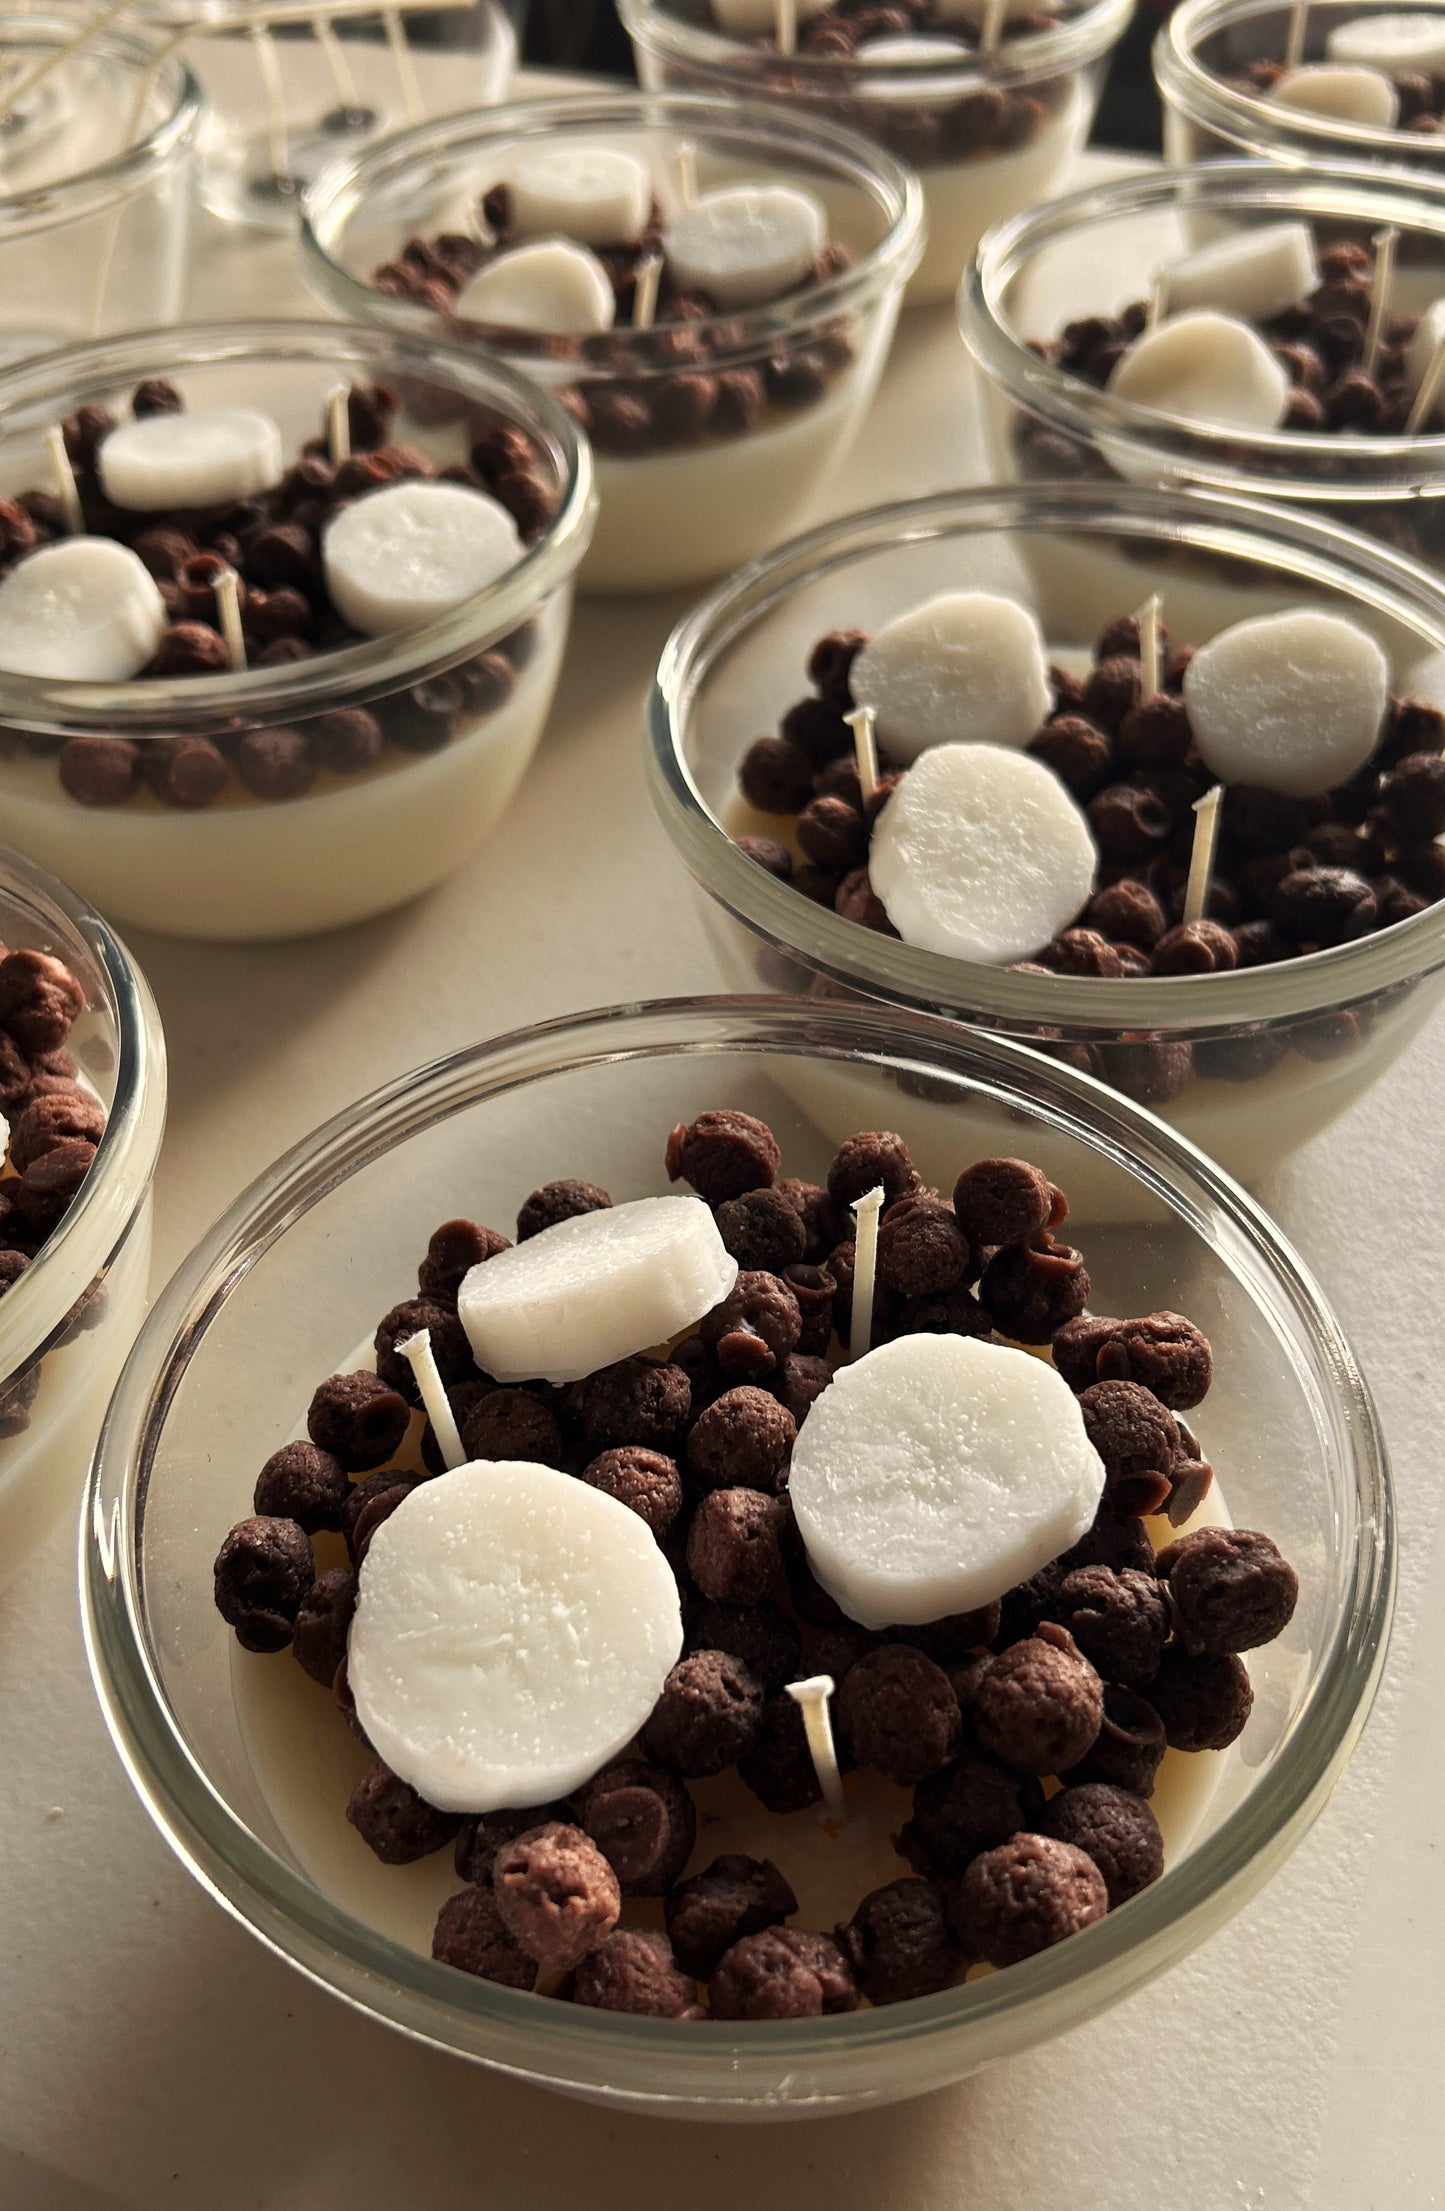 Cereal Candle / Coco Puffs